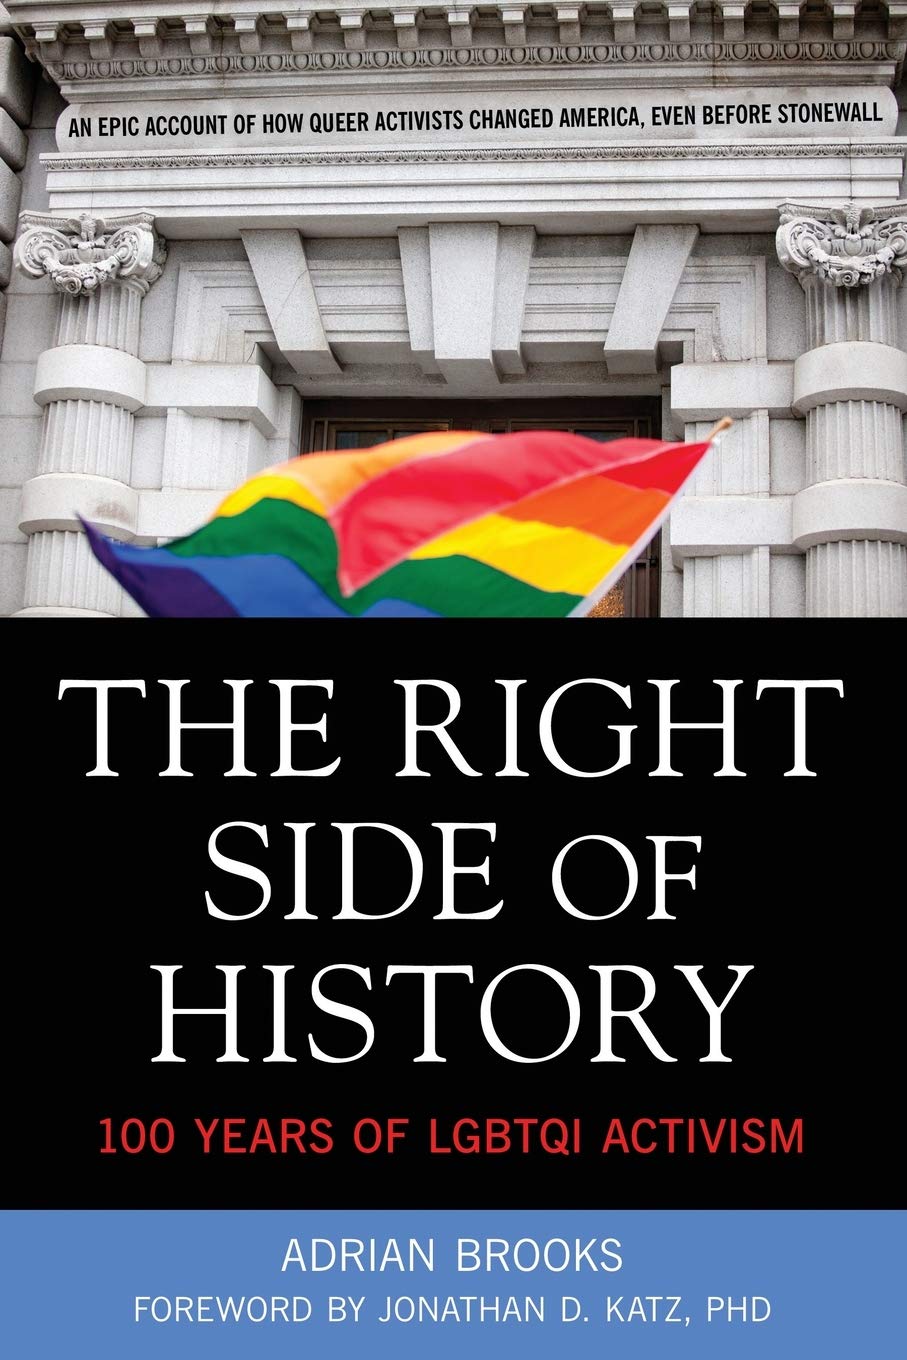 The Right Side of History: 100 Years of LGBTQI Activism